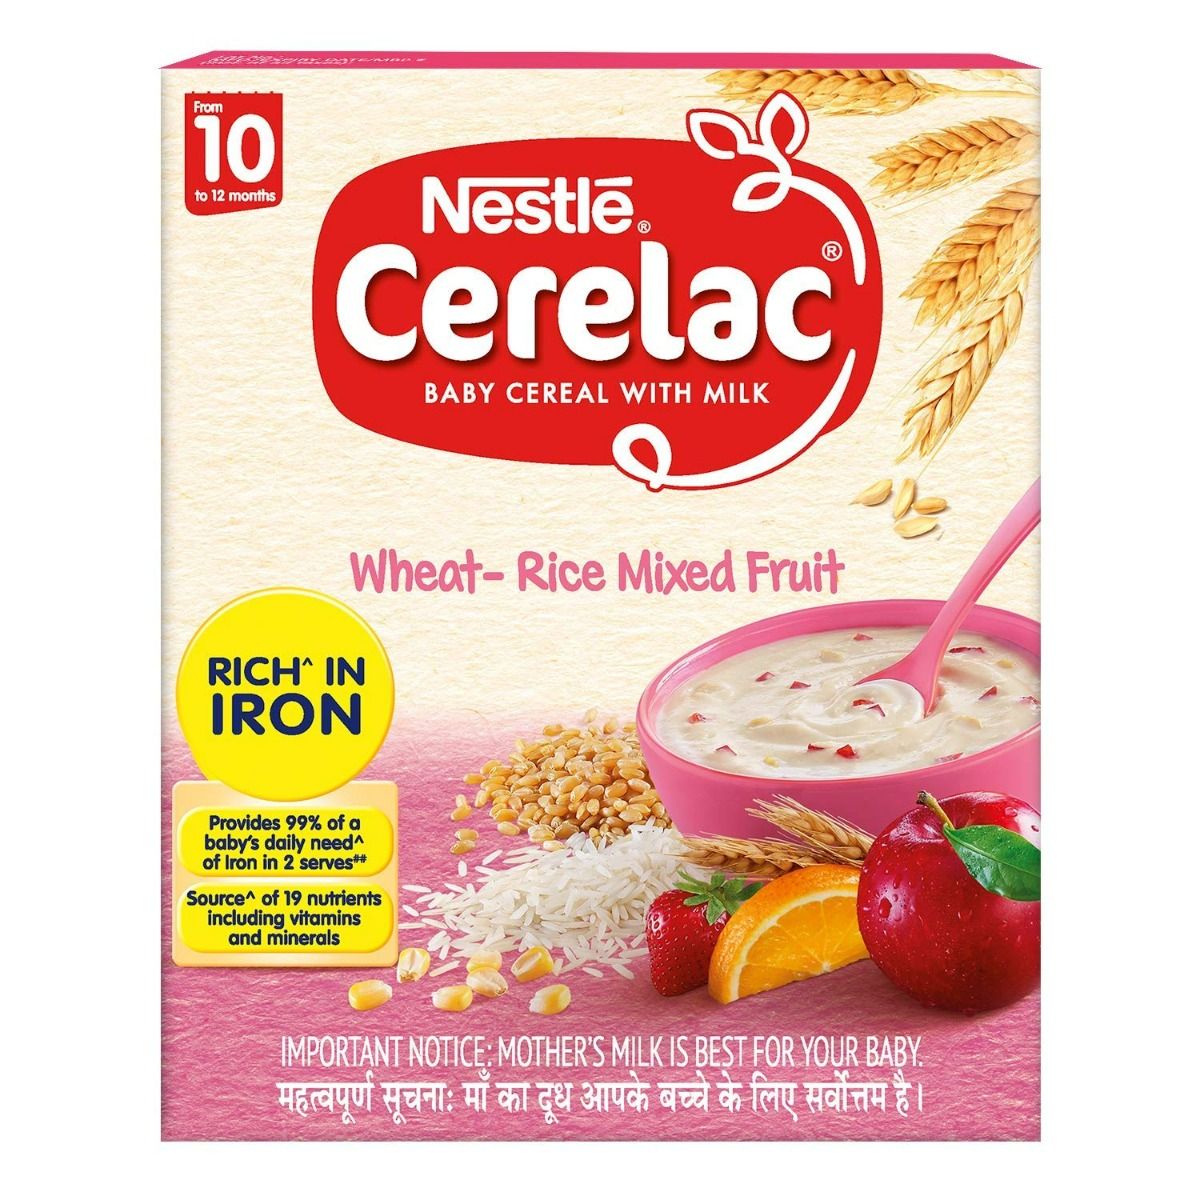 Nestle Cerelac Wheat Rice Mixed Fruit Baby Cereal, 10 to 12 Months, 300 gm Refill Pack, Pack of 1 